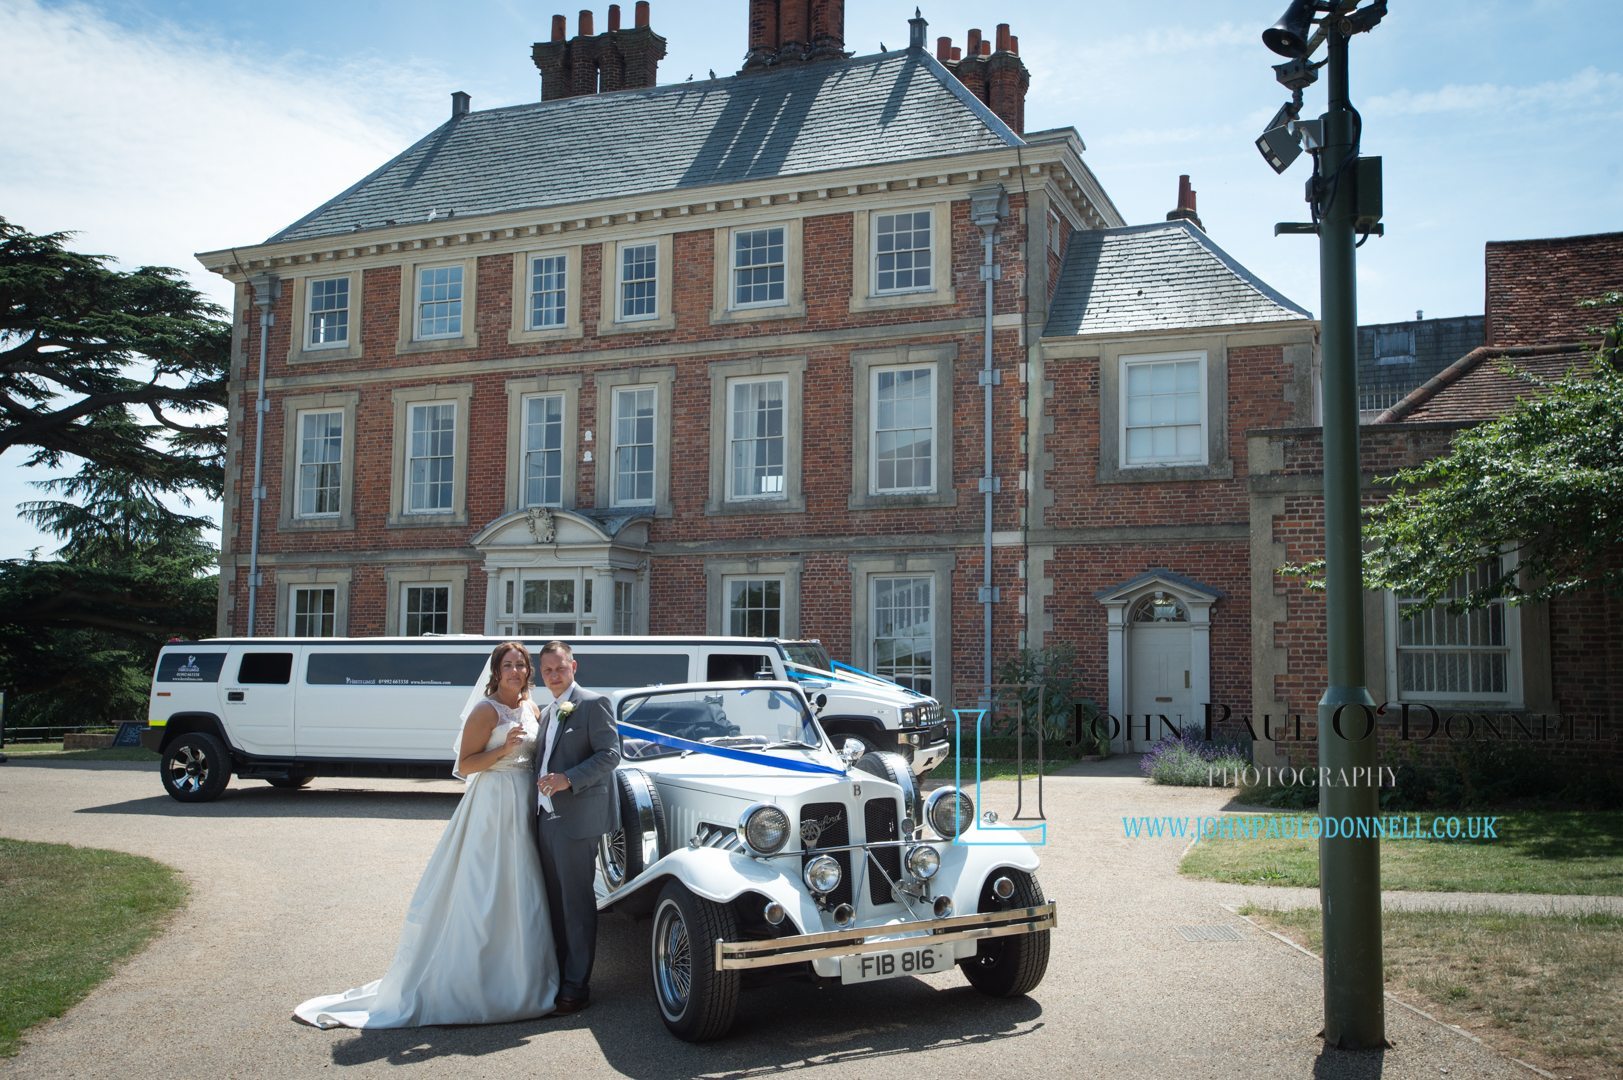 Forty Hall Enfield Wedding Photography - John Paul ODonnell